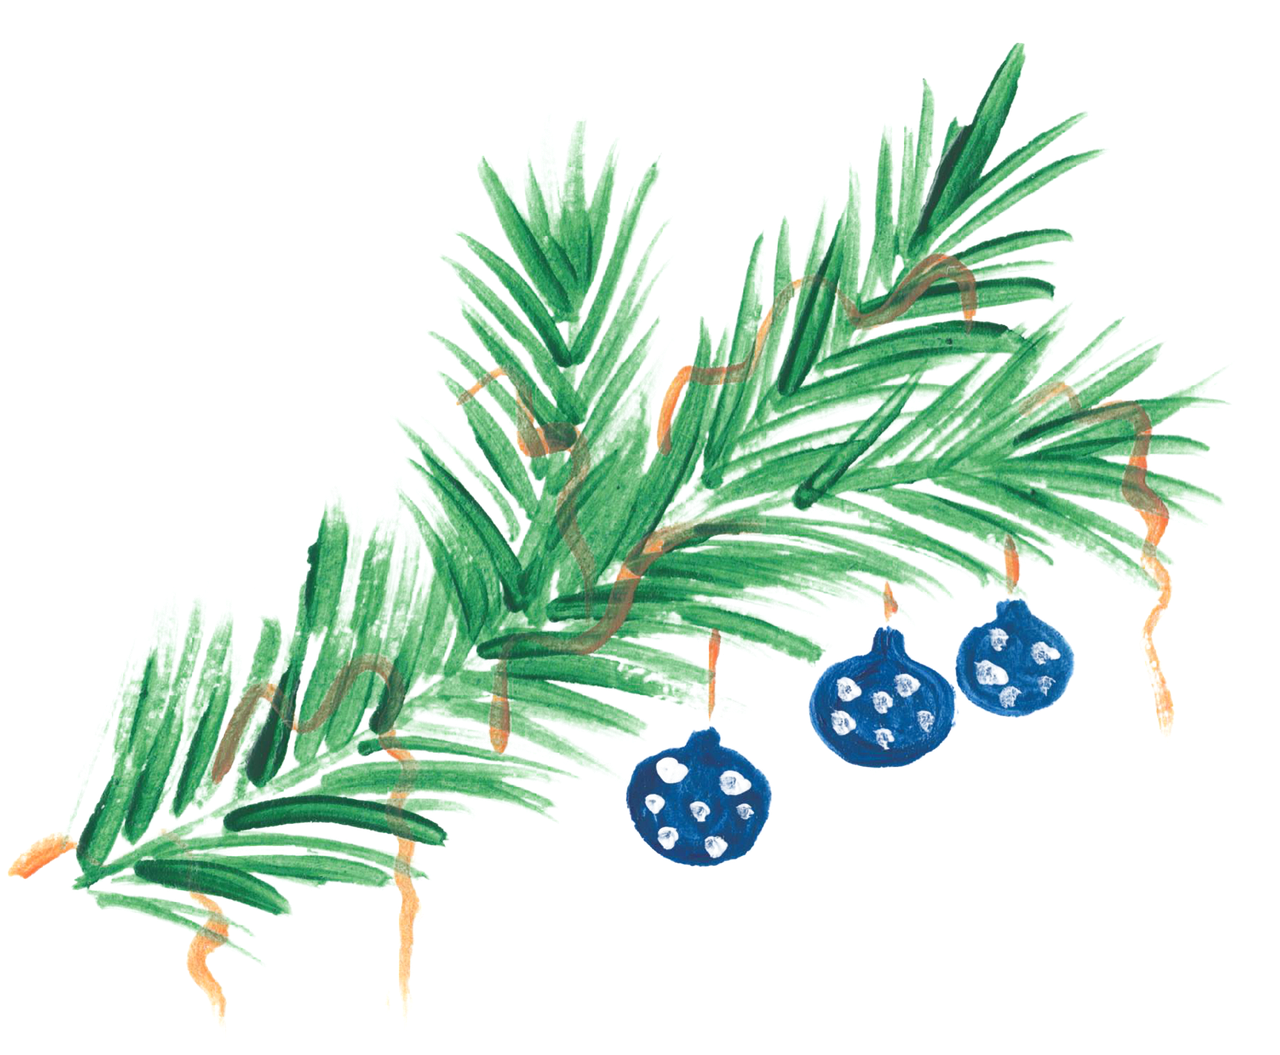 a christmas tree branch with ornaments hanging from it, an illustration of, inspired by Masamitsu Ōta, edible, [bioluminescense, file photo, bold brushwork